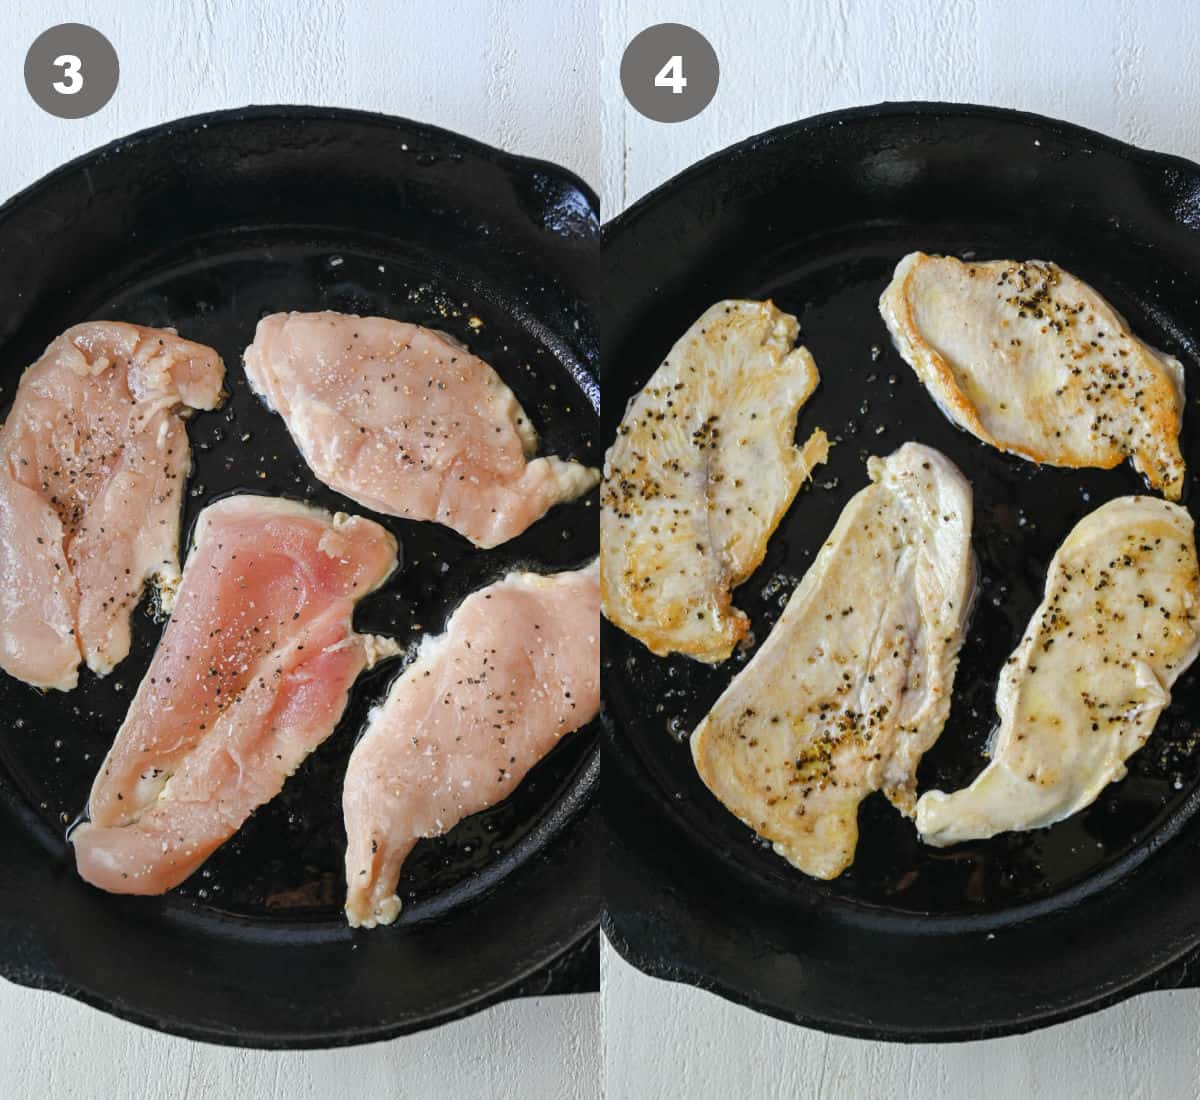 Chicken seared in a cast iron skillet.